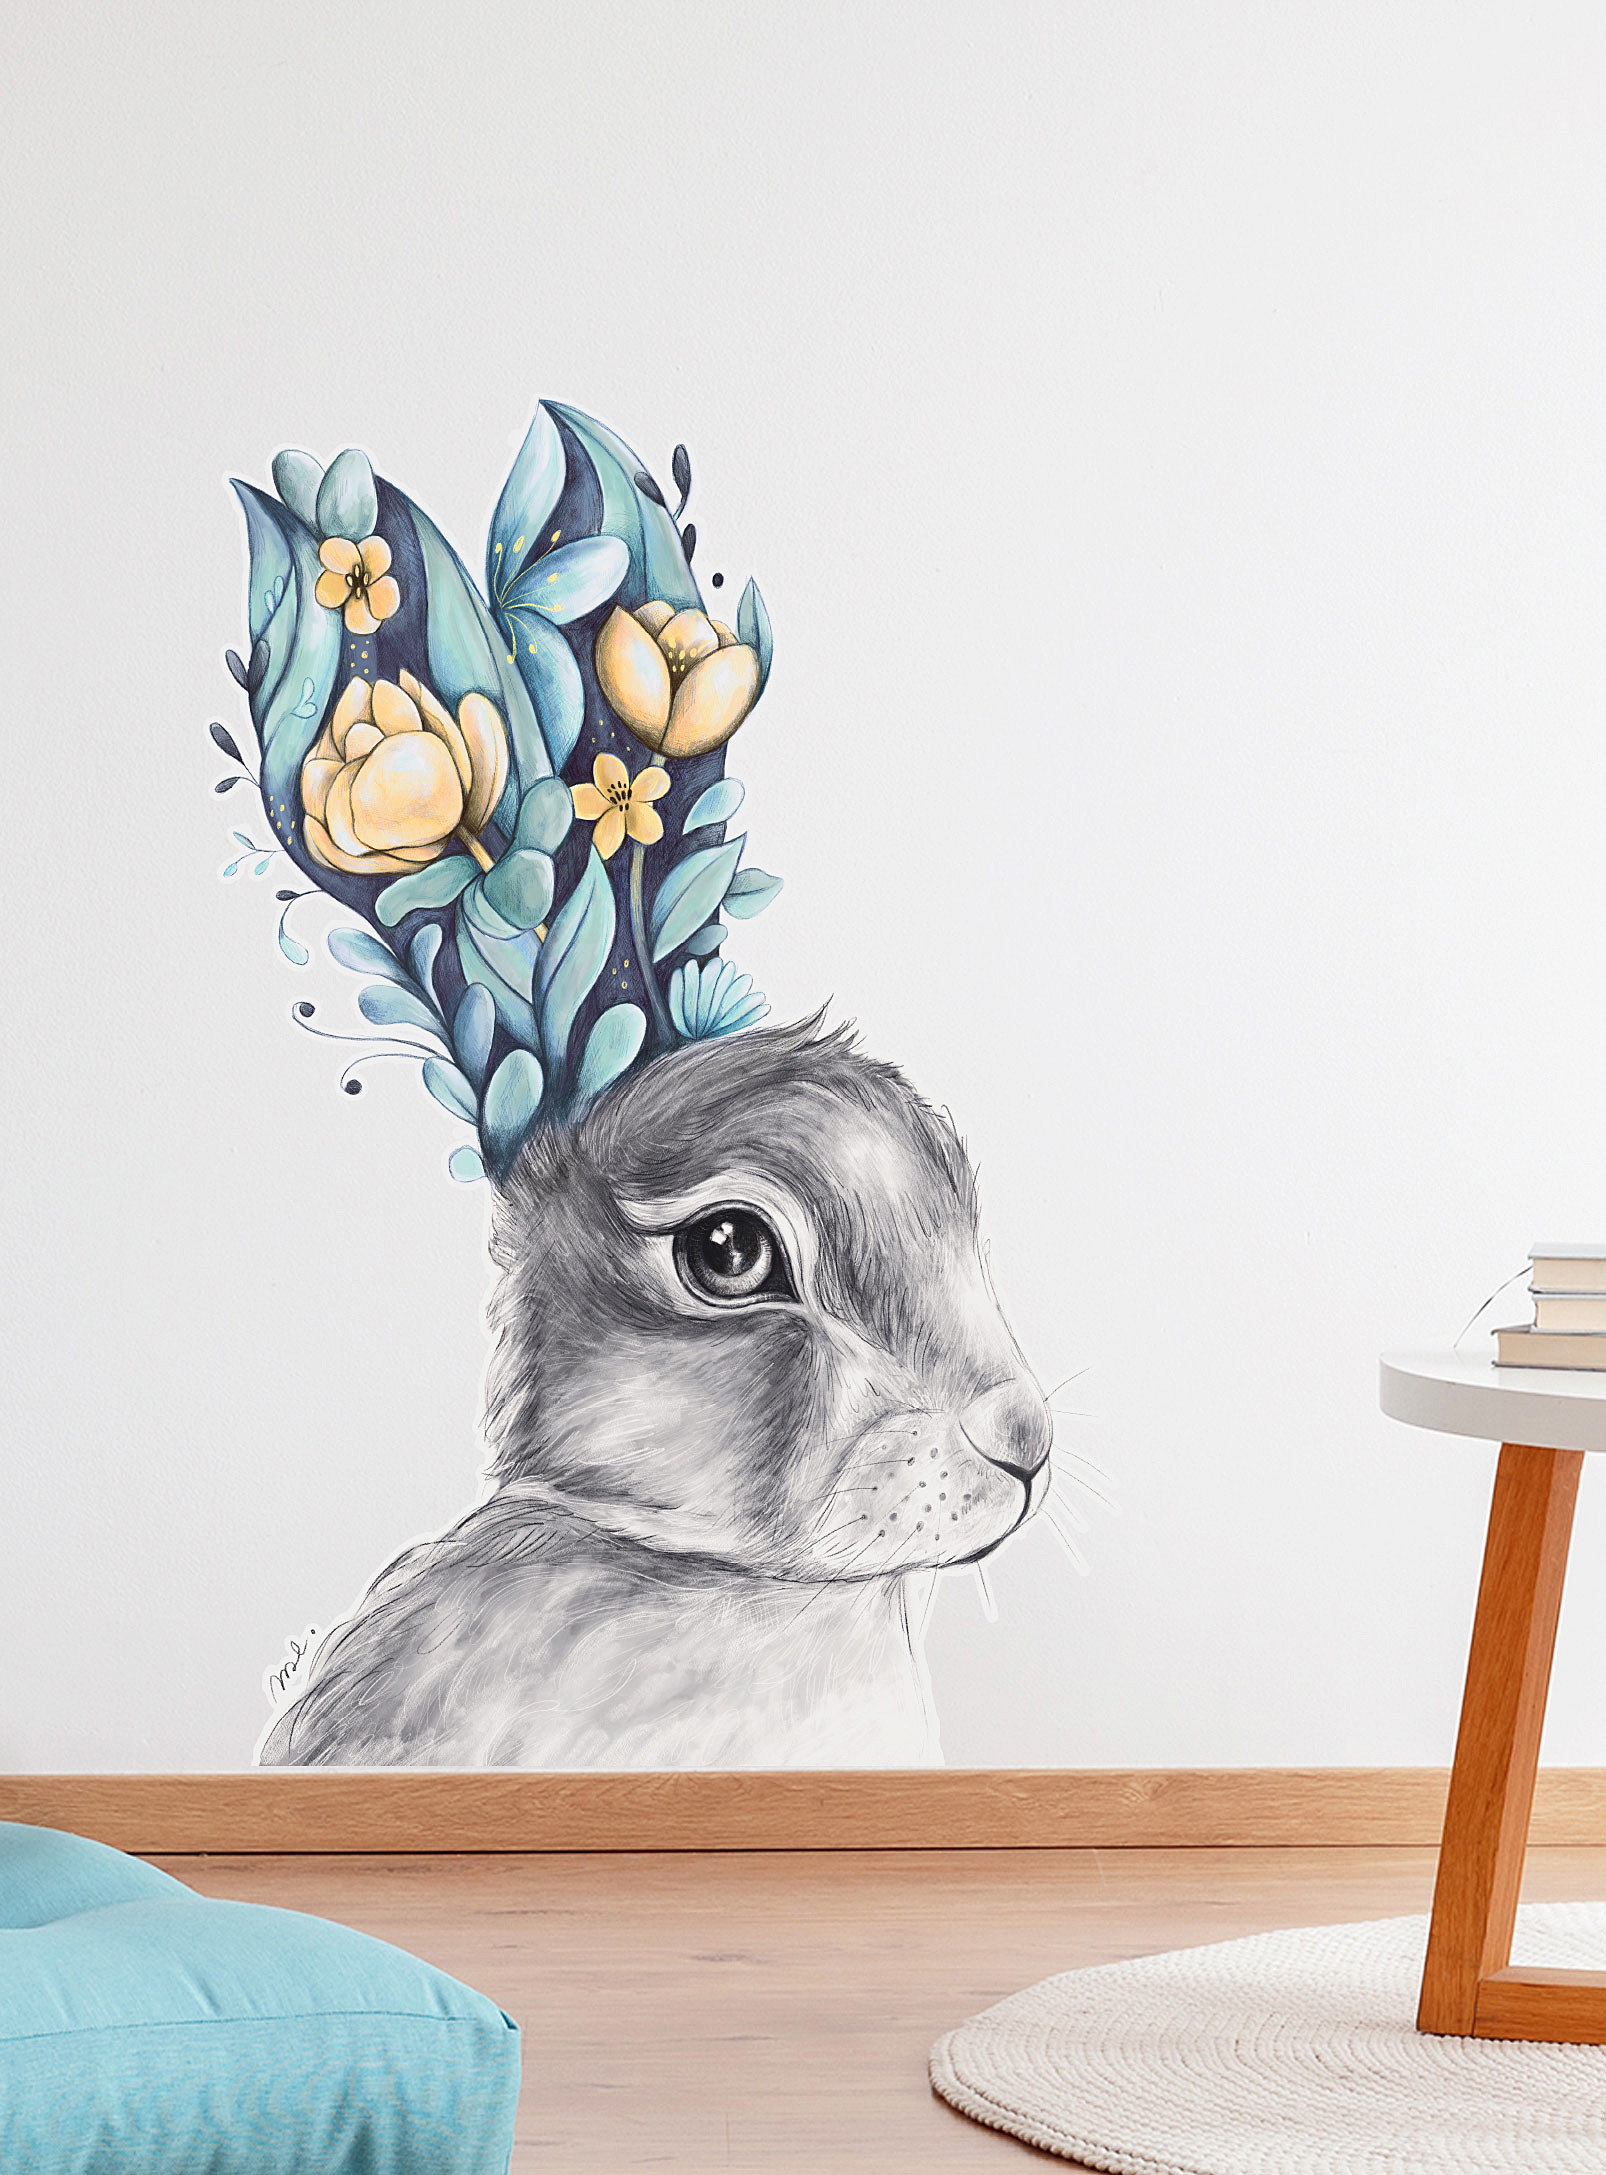 Mélanie Foster Illustrations - Floral hare wall sticker